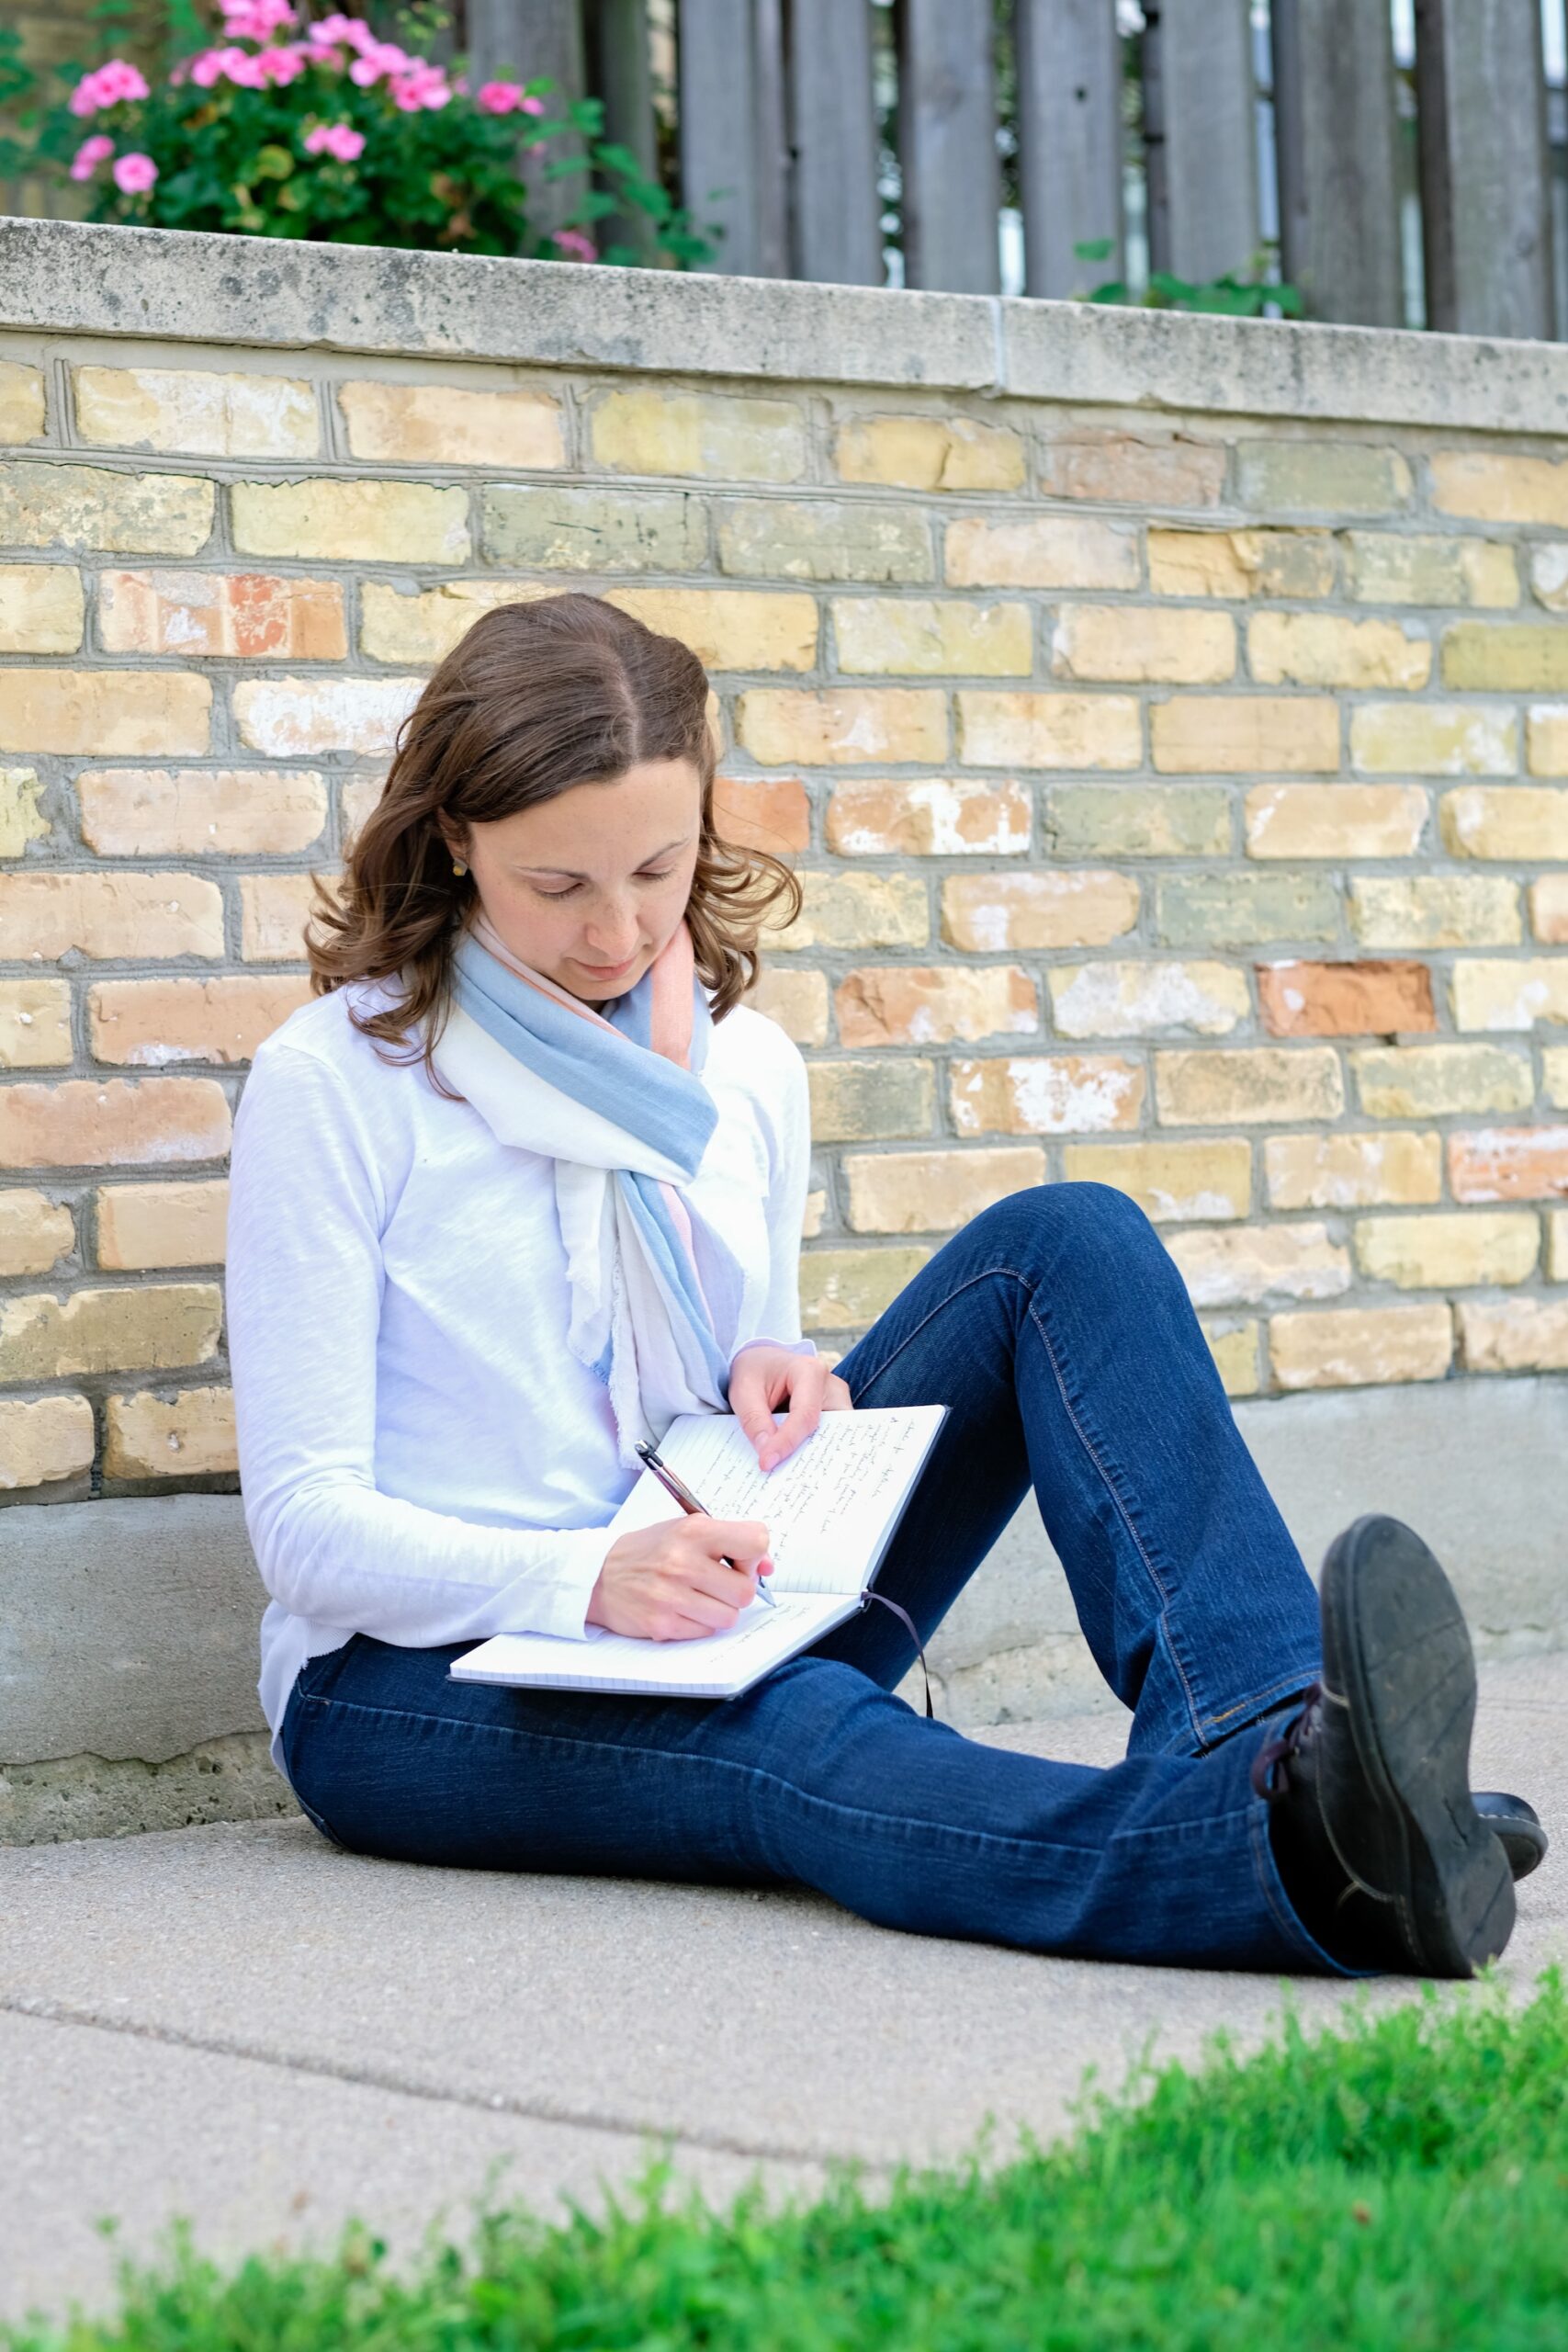 Lori Wolf-Heffner is sitting against a yellow brick wall, writing in a journal.